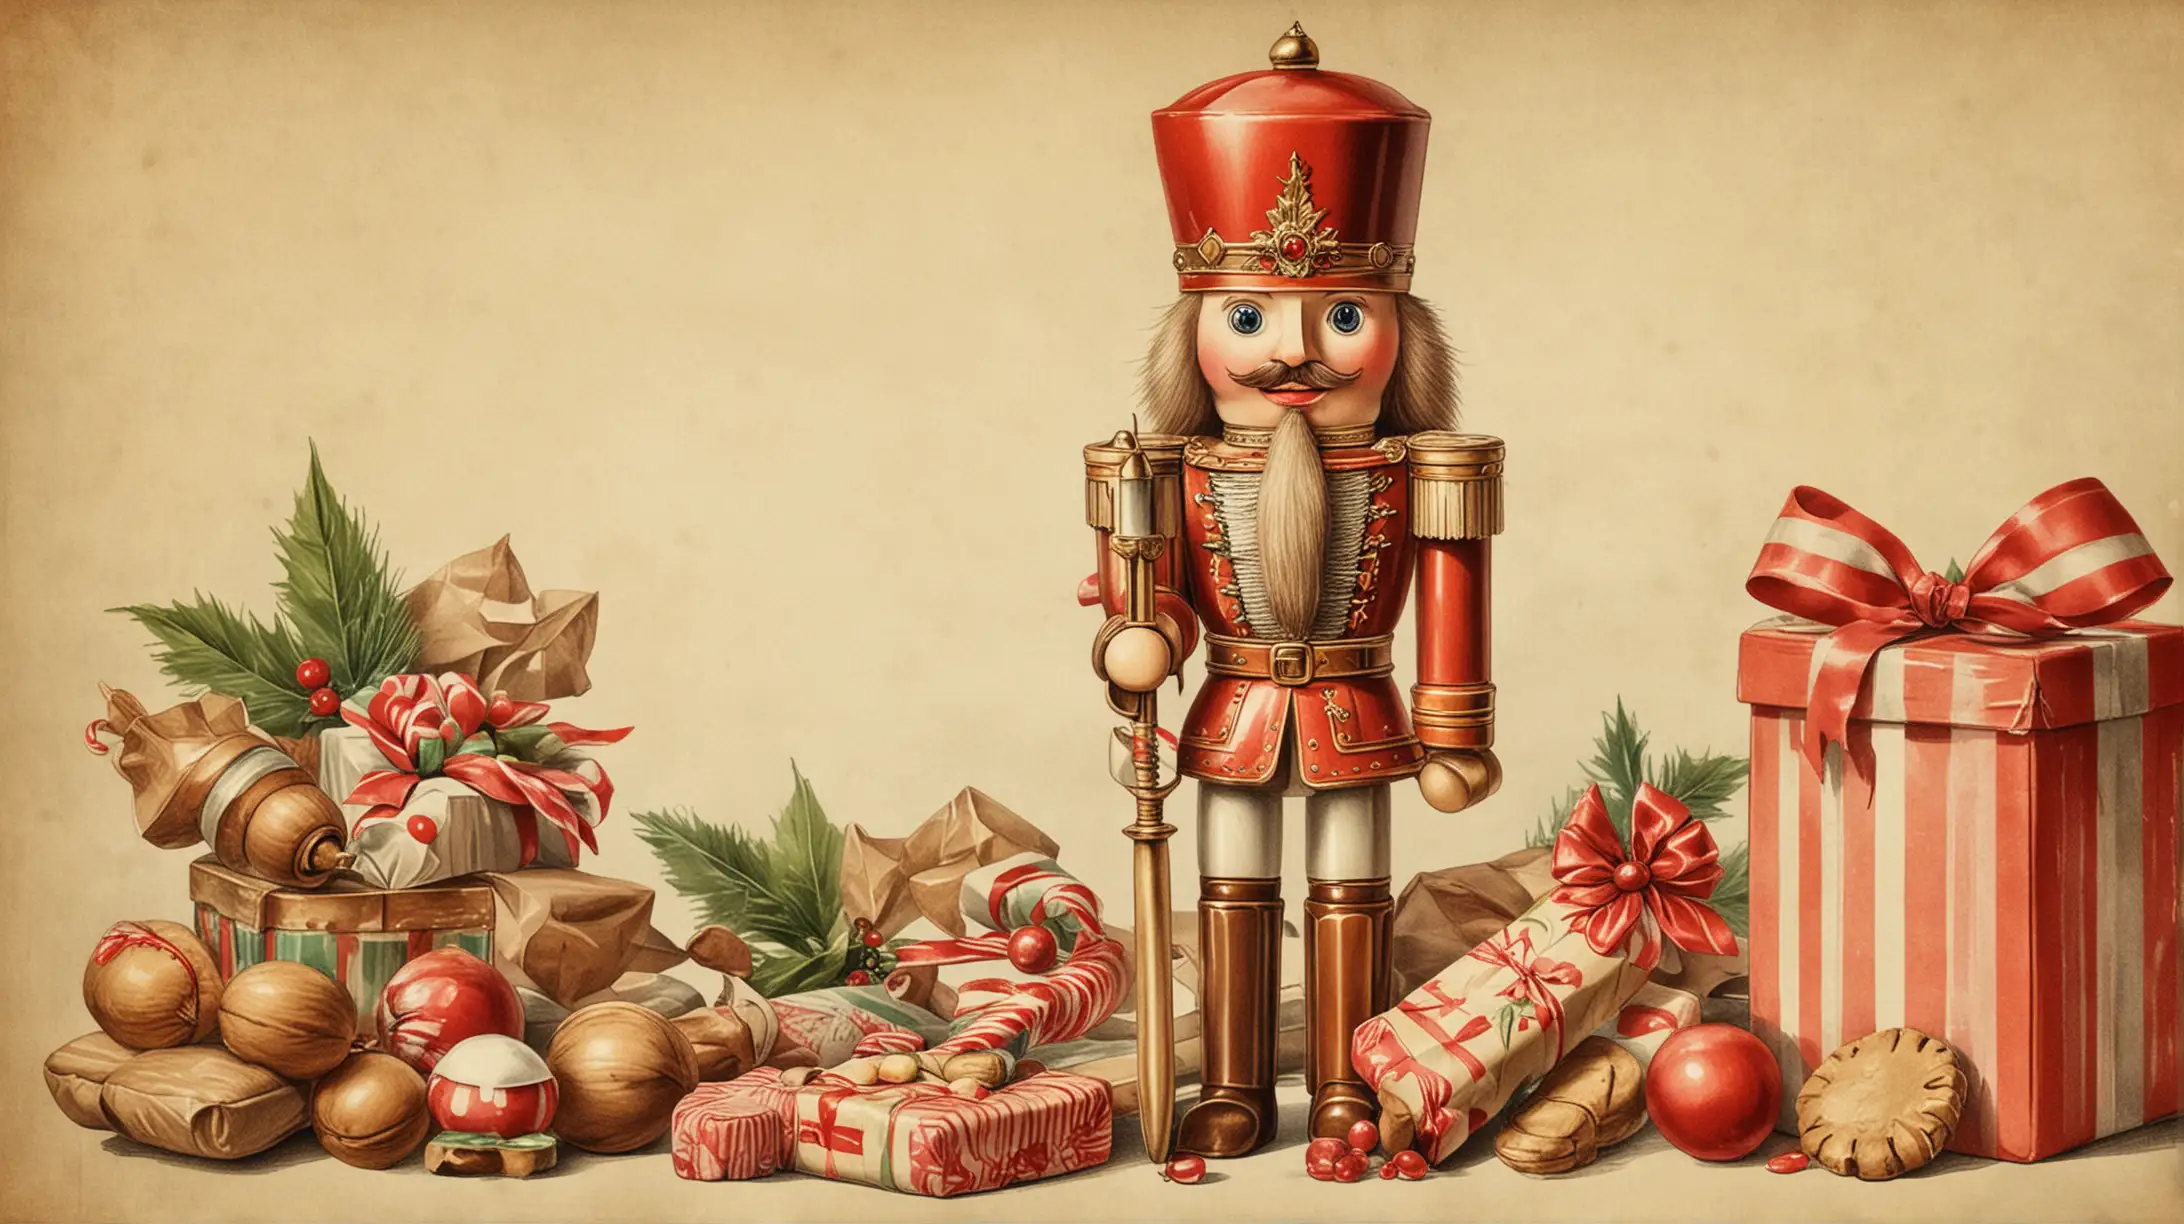 Vintage Christmas Nutcracker with Sweets and Gifts Illustration